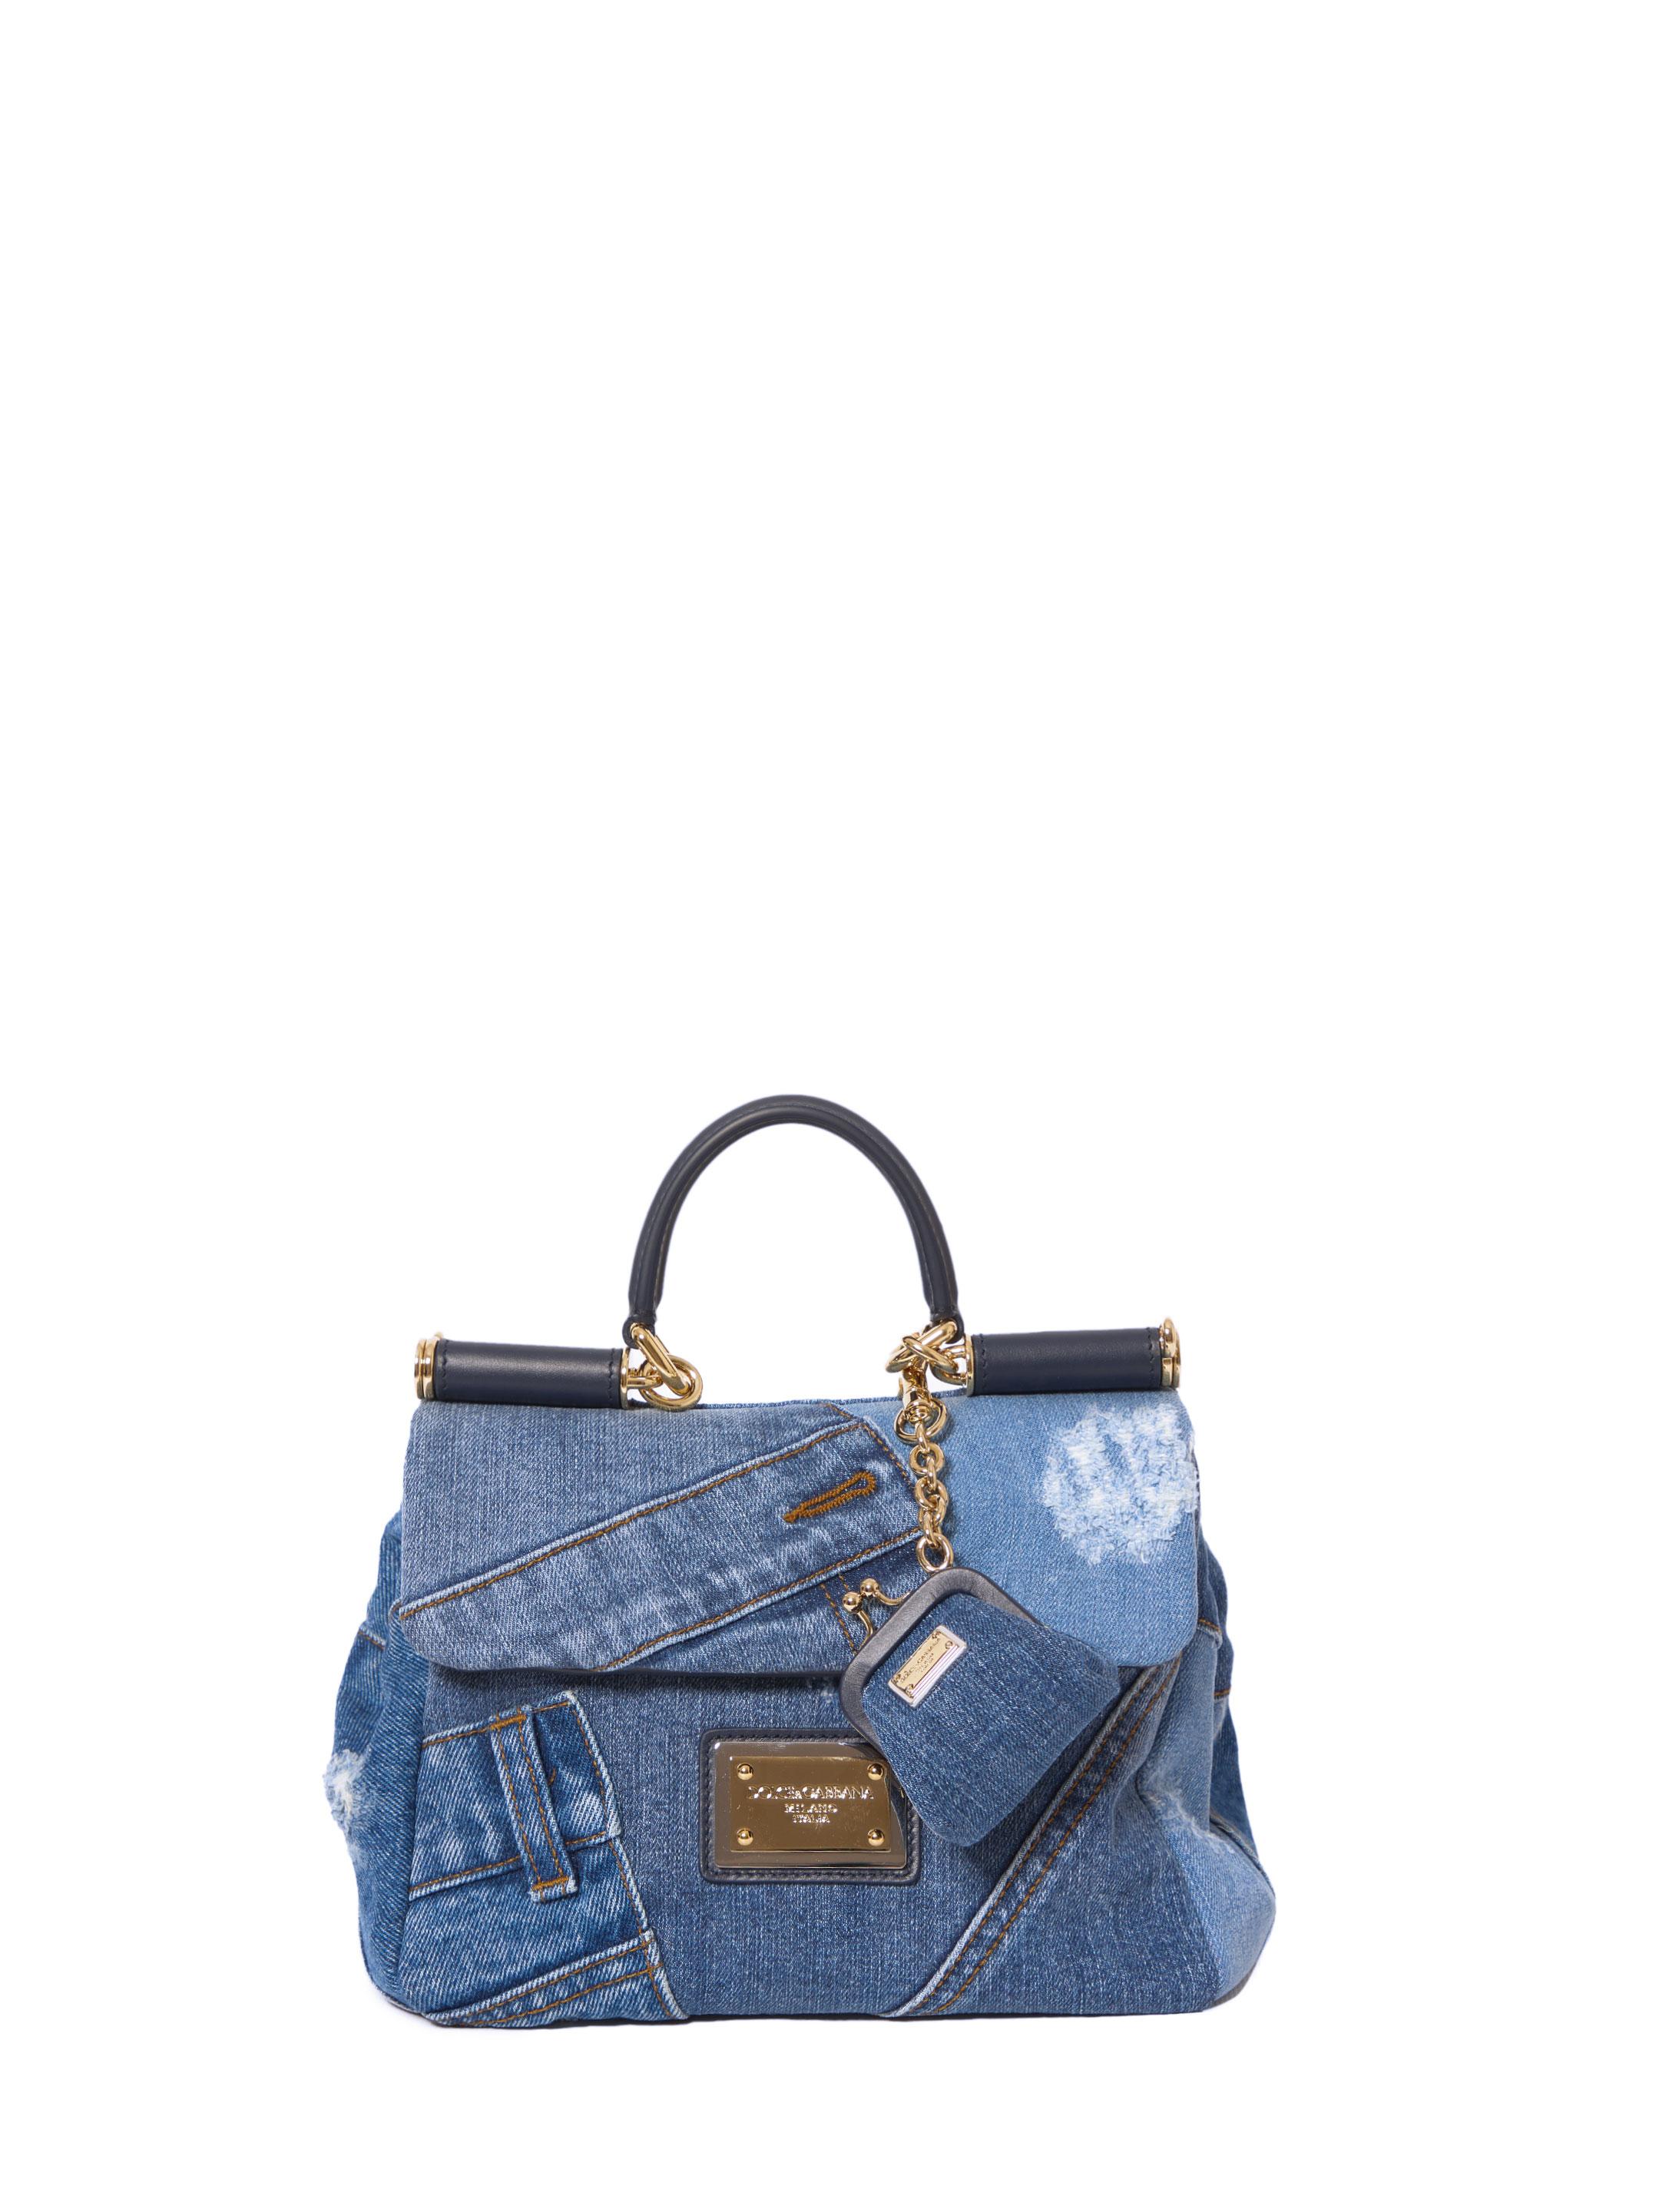 Dolce & Gabbana Small Sicily Patchwork Bag in Blue | Lyst